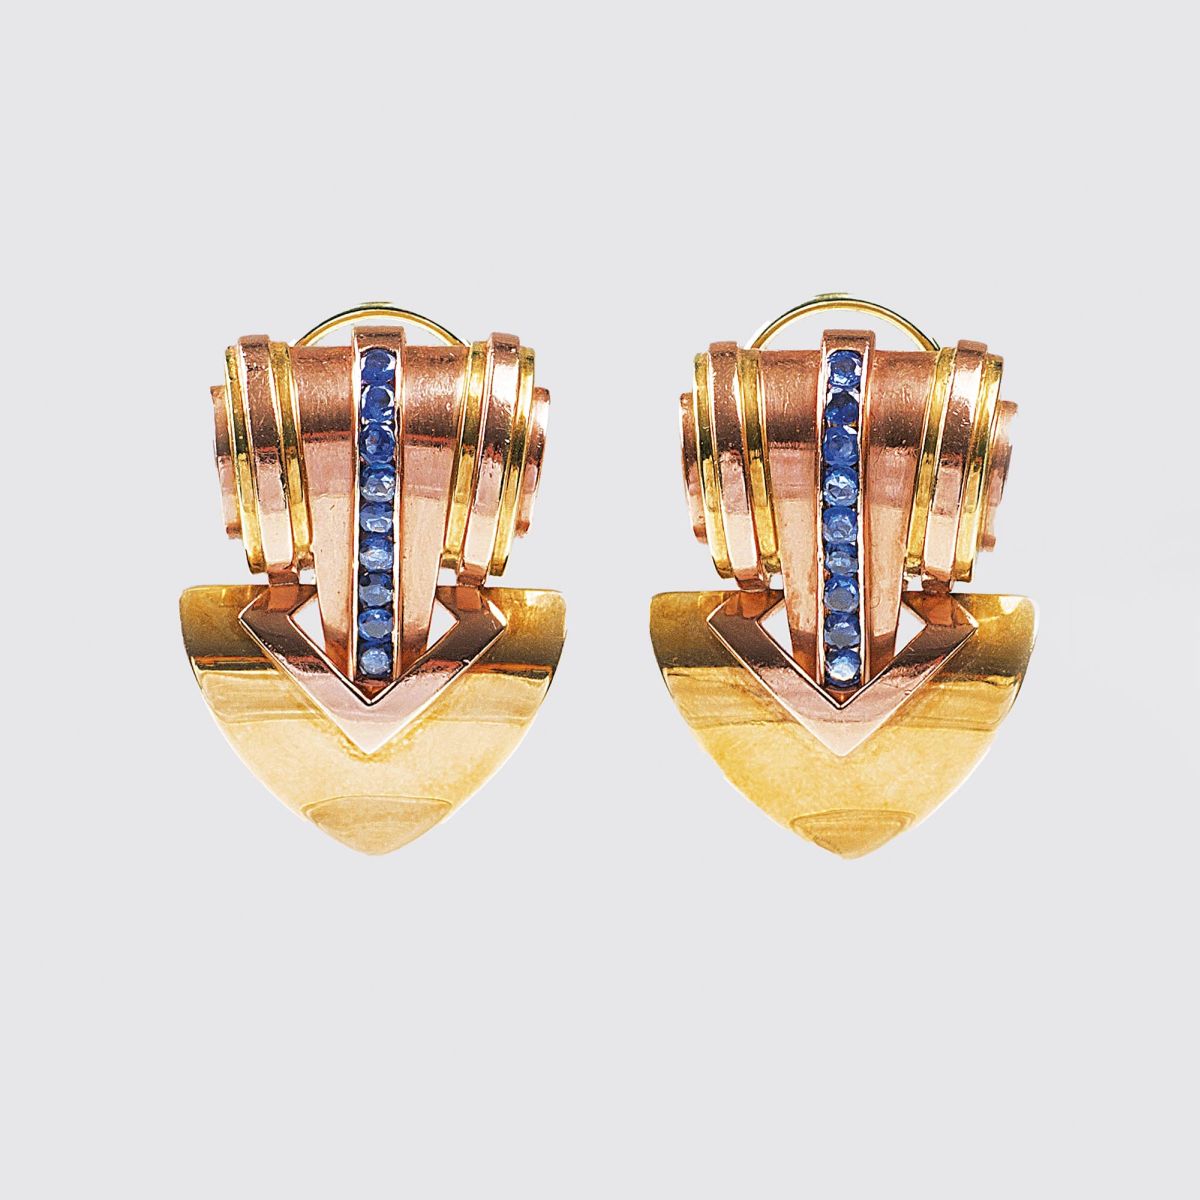 A Pair of Art-déco Gold Earclips